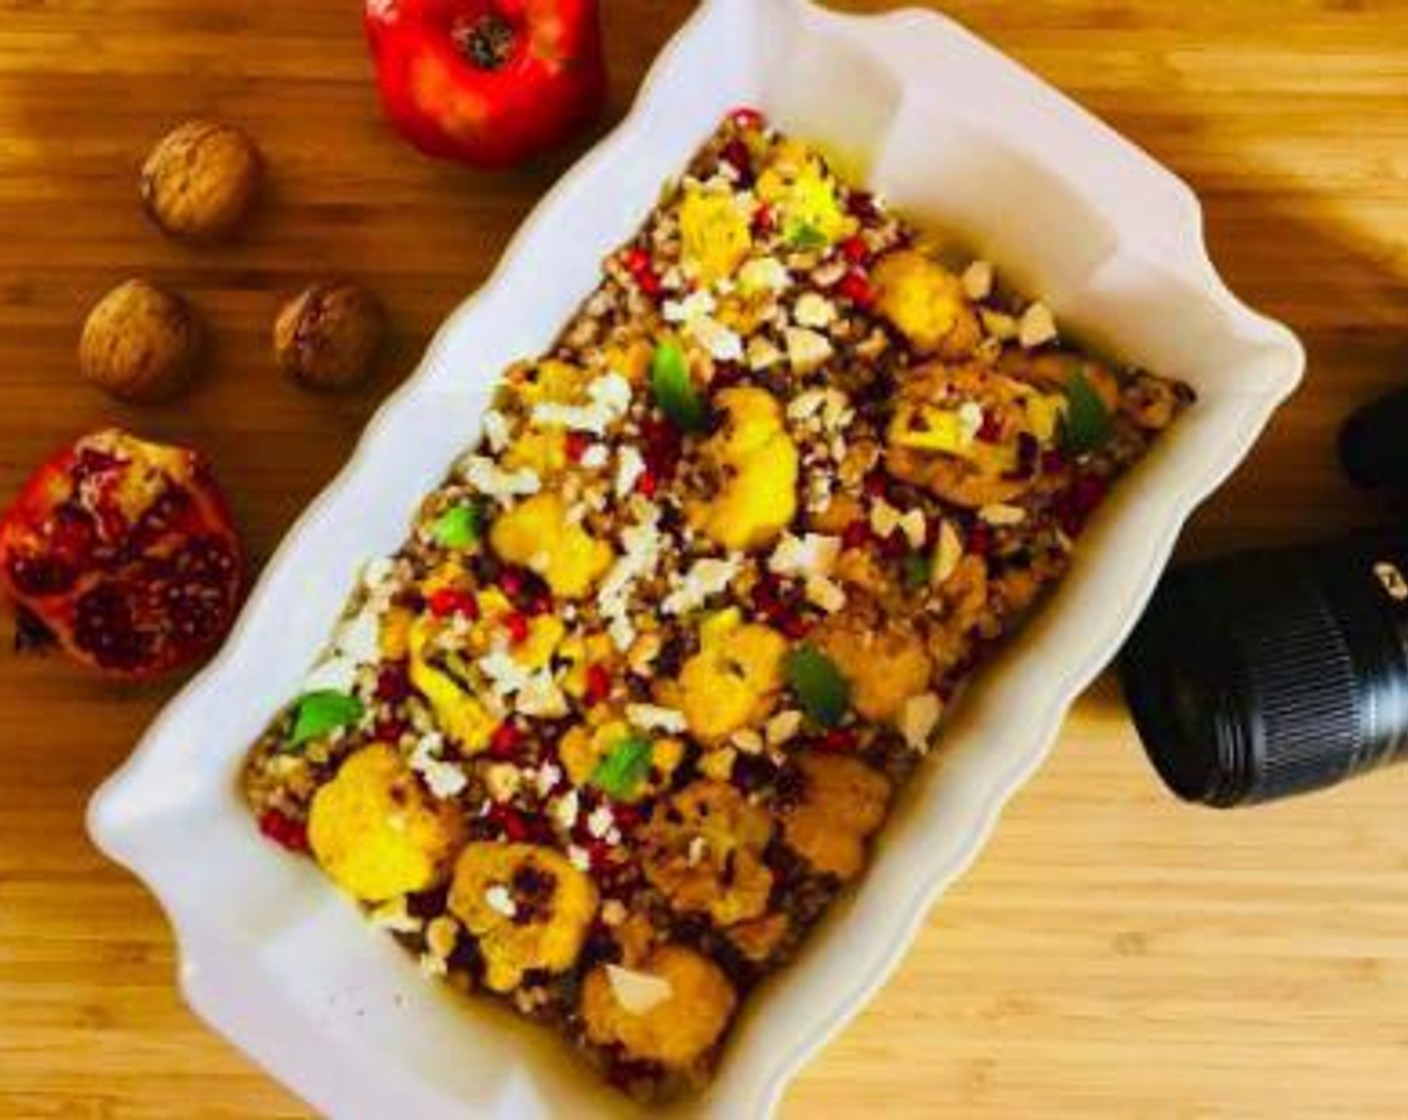 step 4 Combine the roasted cauliflower and barley into a large serving dish. Crack a few Walnuts (4) and deseed one Pomegranate (1). Add them to the barley and cauliflower together with some Feta Cheese (1/2 cup).